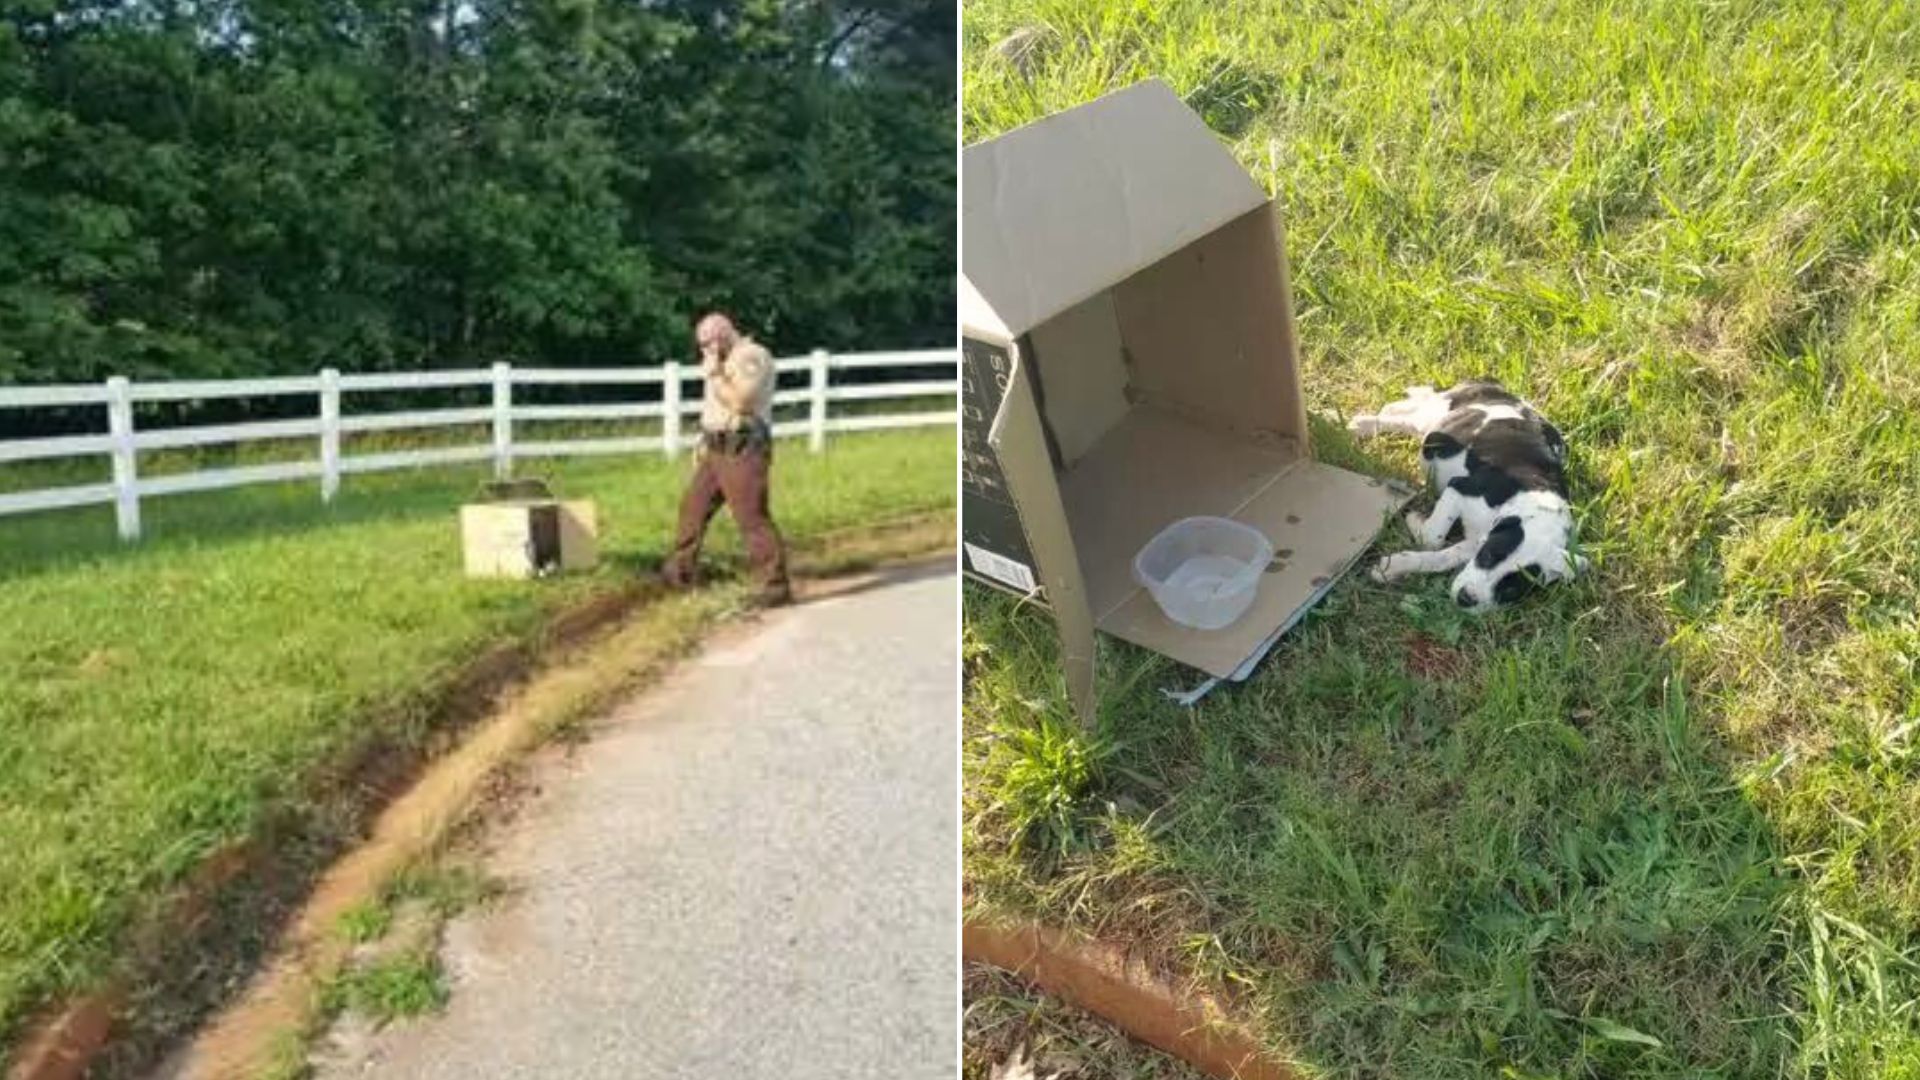 Police Officer Couldn’t Believe What He Found In A Small Box Near The Road